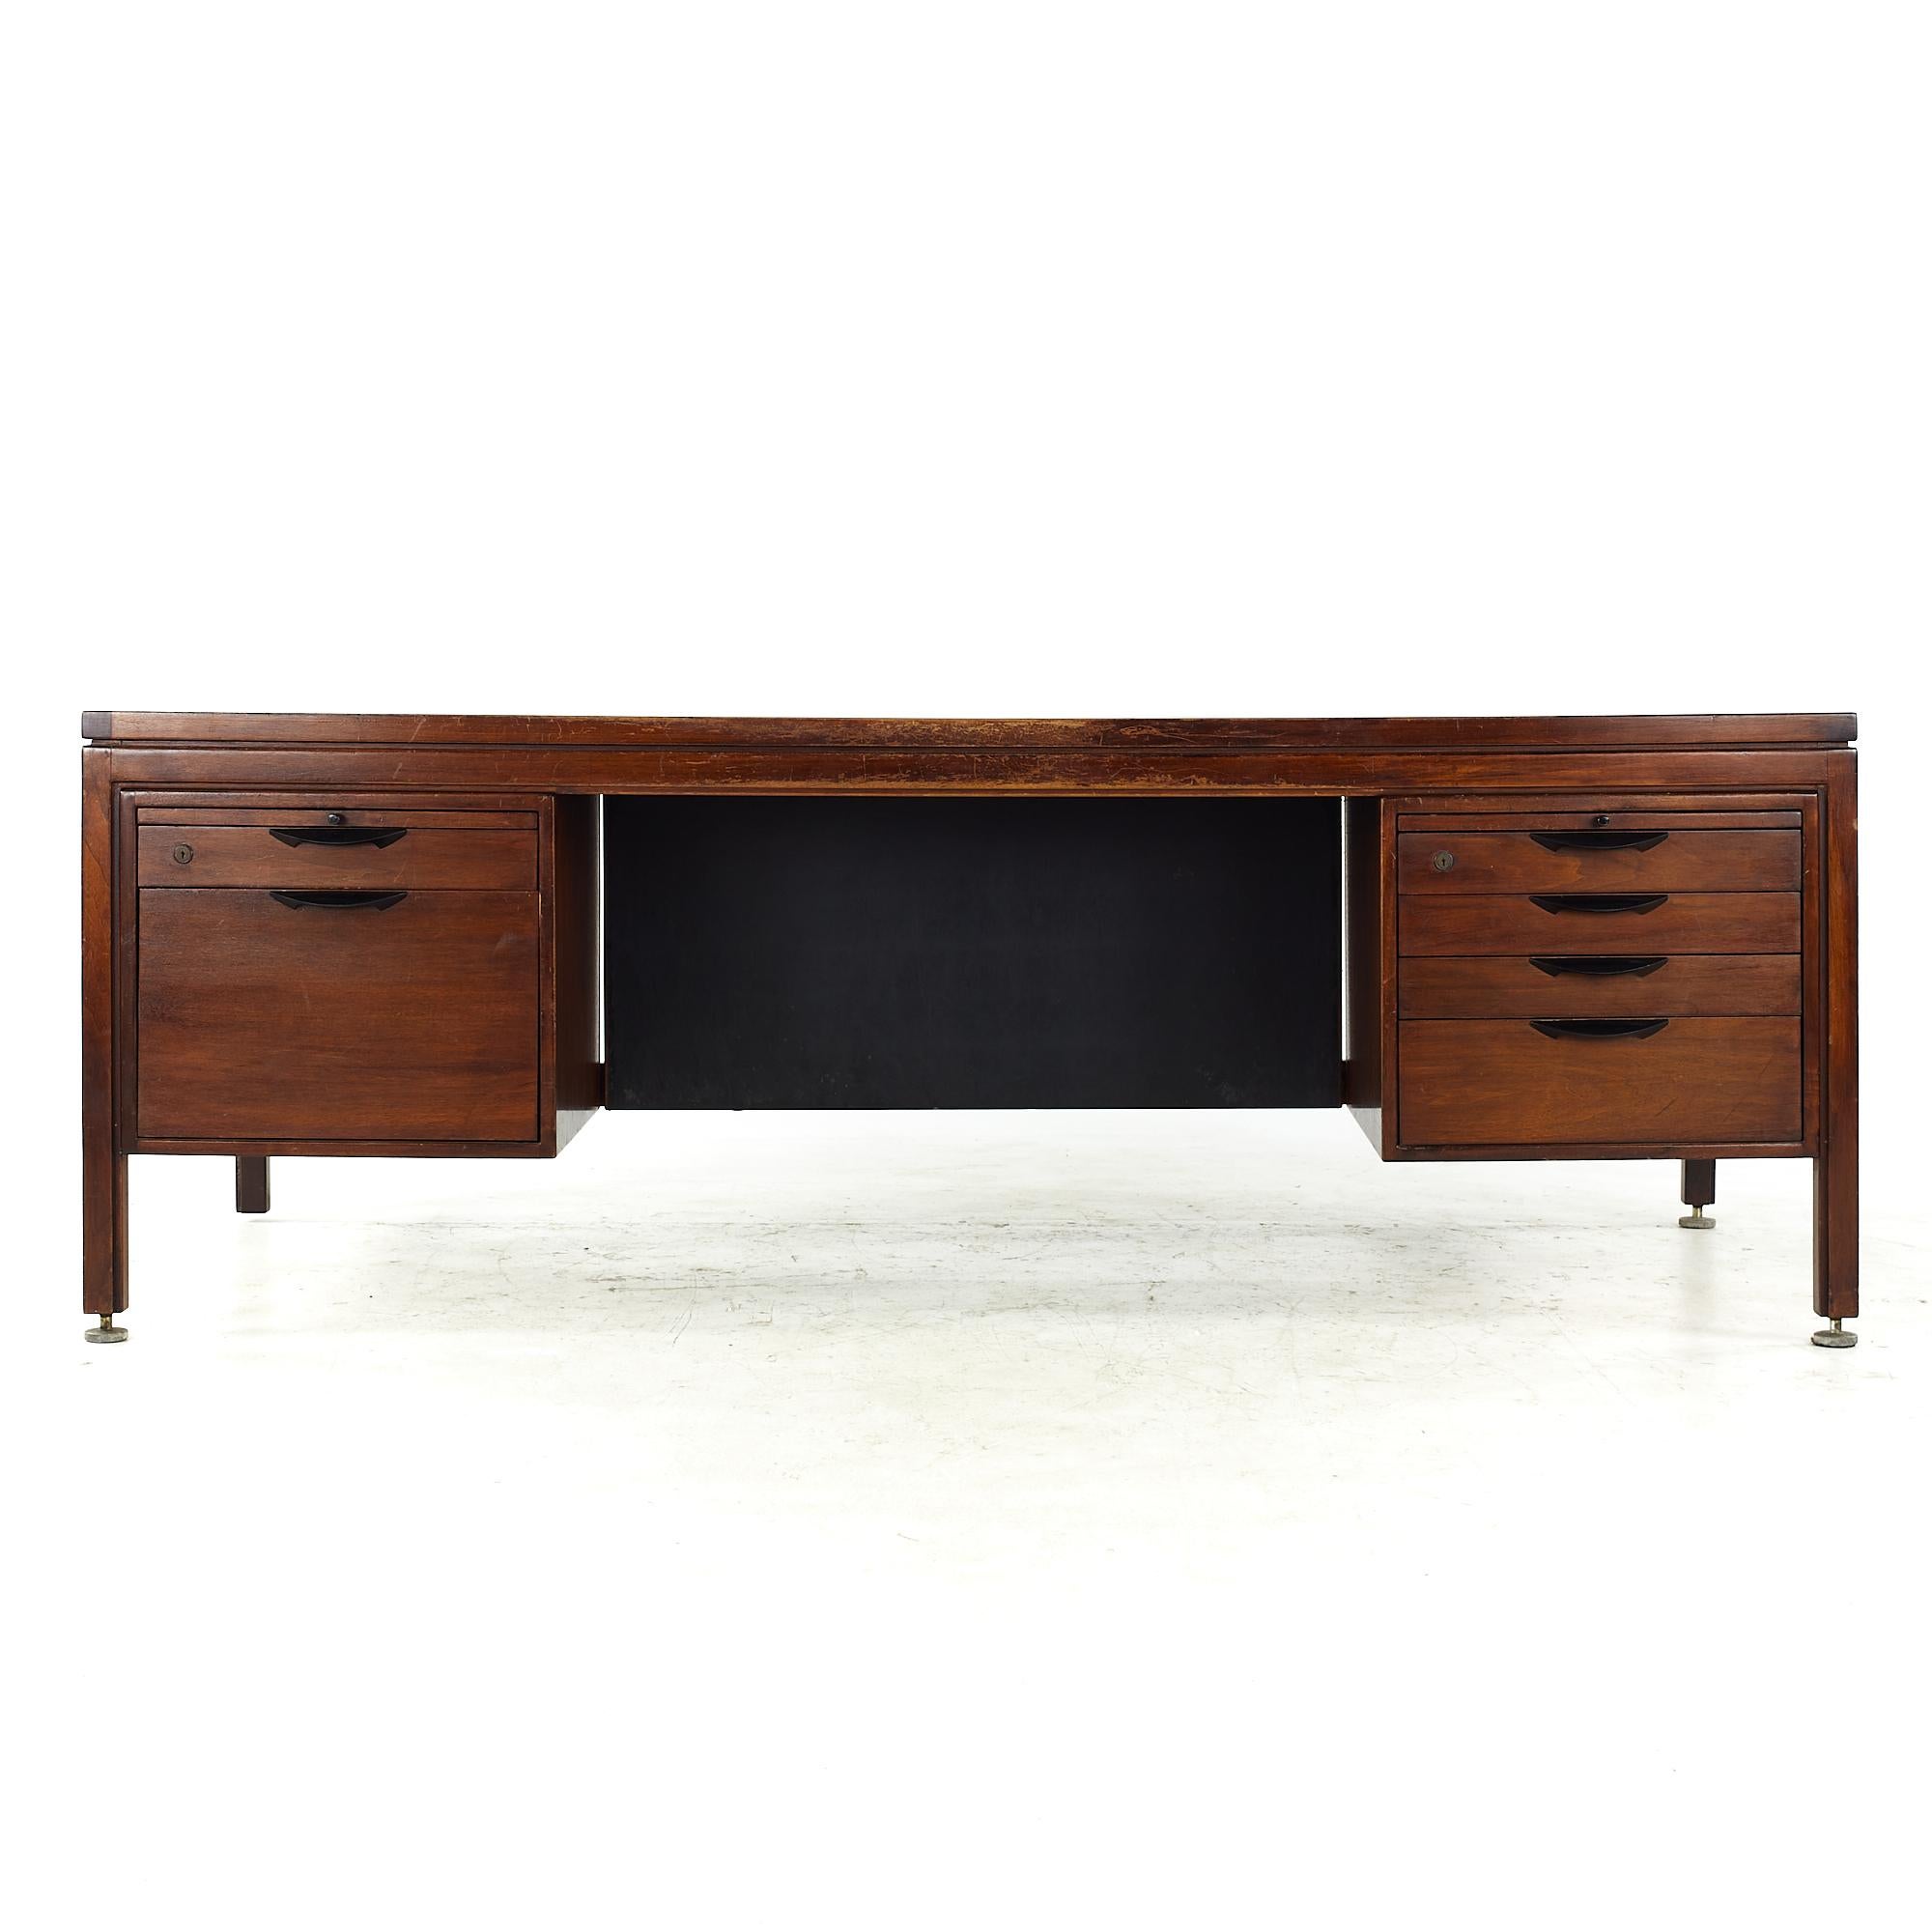 Jens Risom midcentury walnut executive desk

This desk measures: 81.5 wide x 36 deep x 29 high, with a chair clearance of 25.25 inches

All pieces of furniture can be had in what we call restored vintage condition. That means the piece is